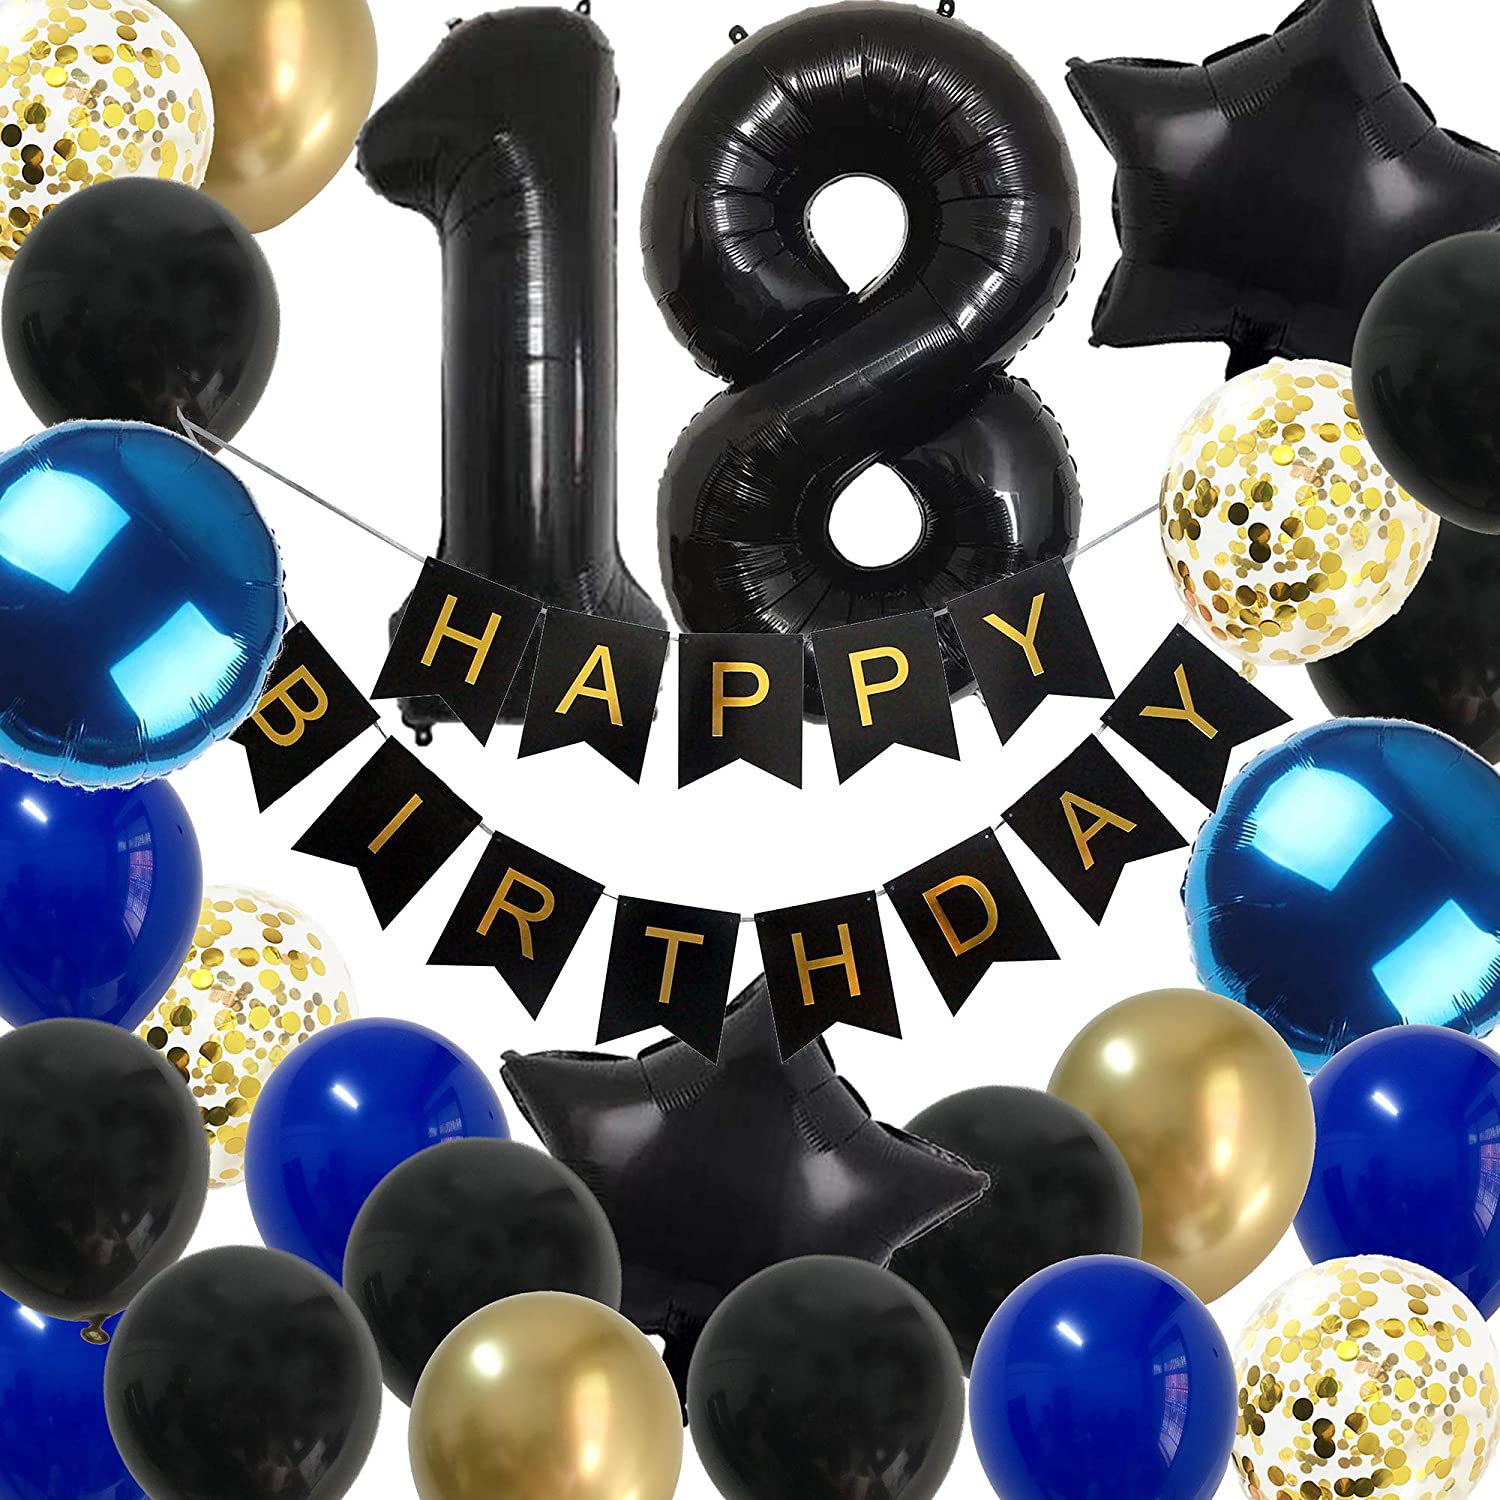 Banner Printed With Happy 18th Birthday Amas *** Super Cool Blue Glitter Party Decorations and Tableware for 18th Birthday ***